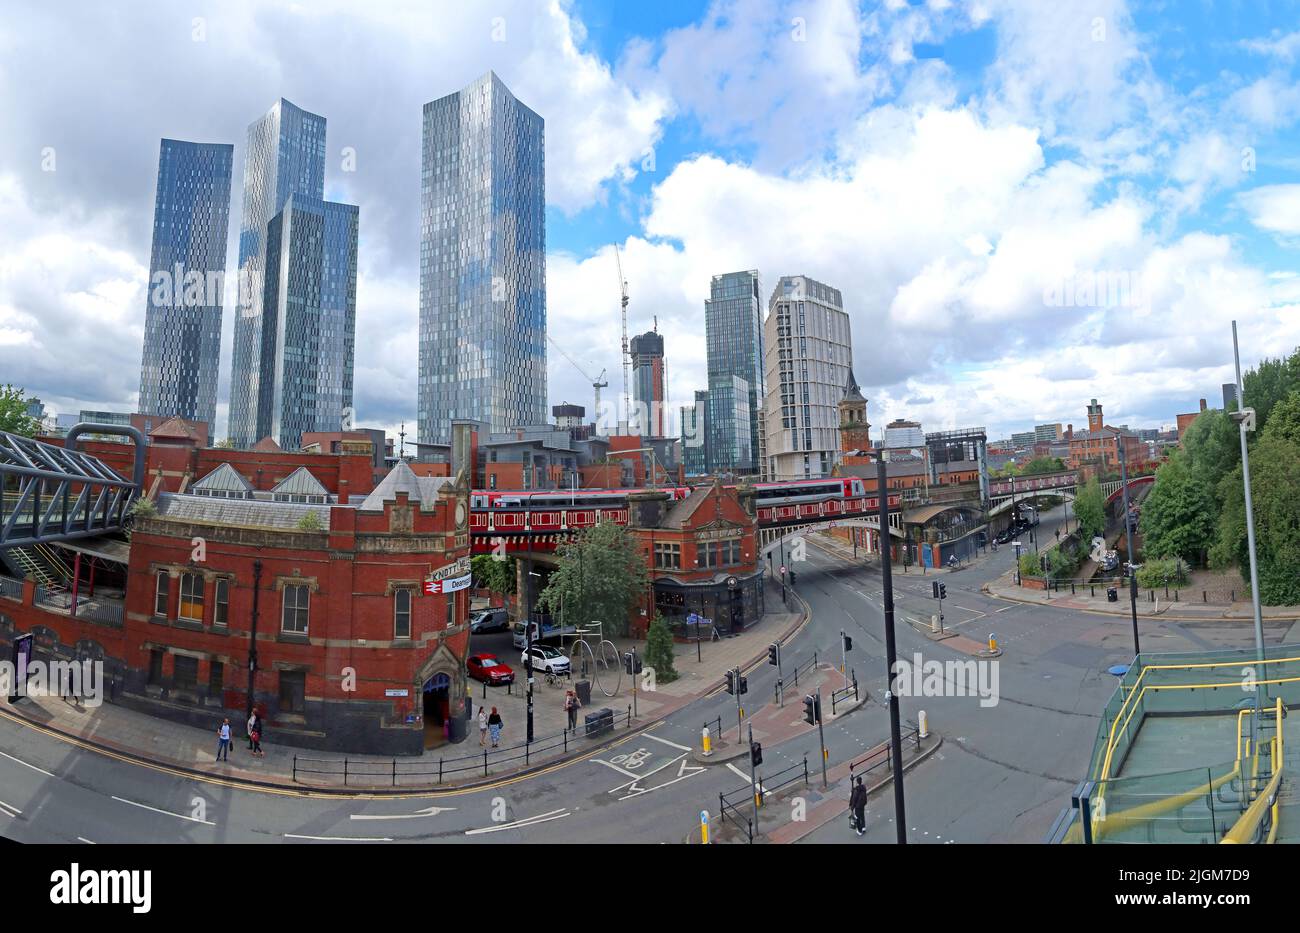 Panorama of Deansgate Castlefield, Manchester, 2 Whitworth St W, Deansgate, Locks, Manchester, England, UK,  M1 5LH Stock Photo